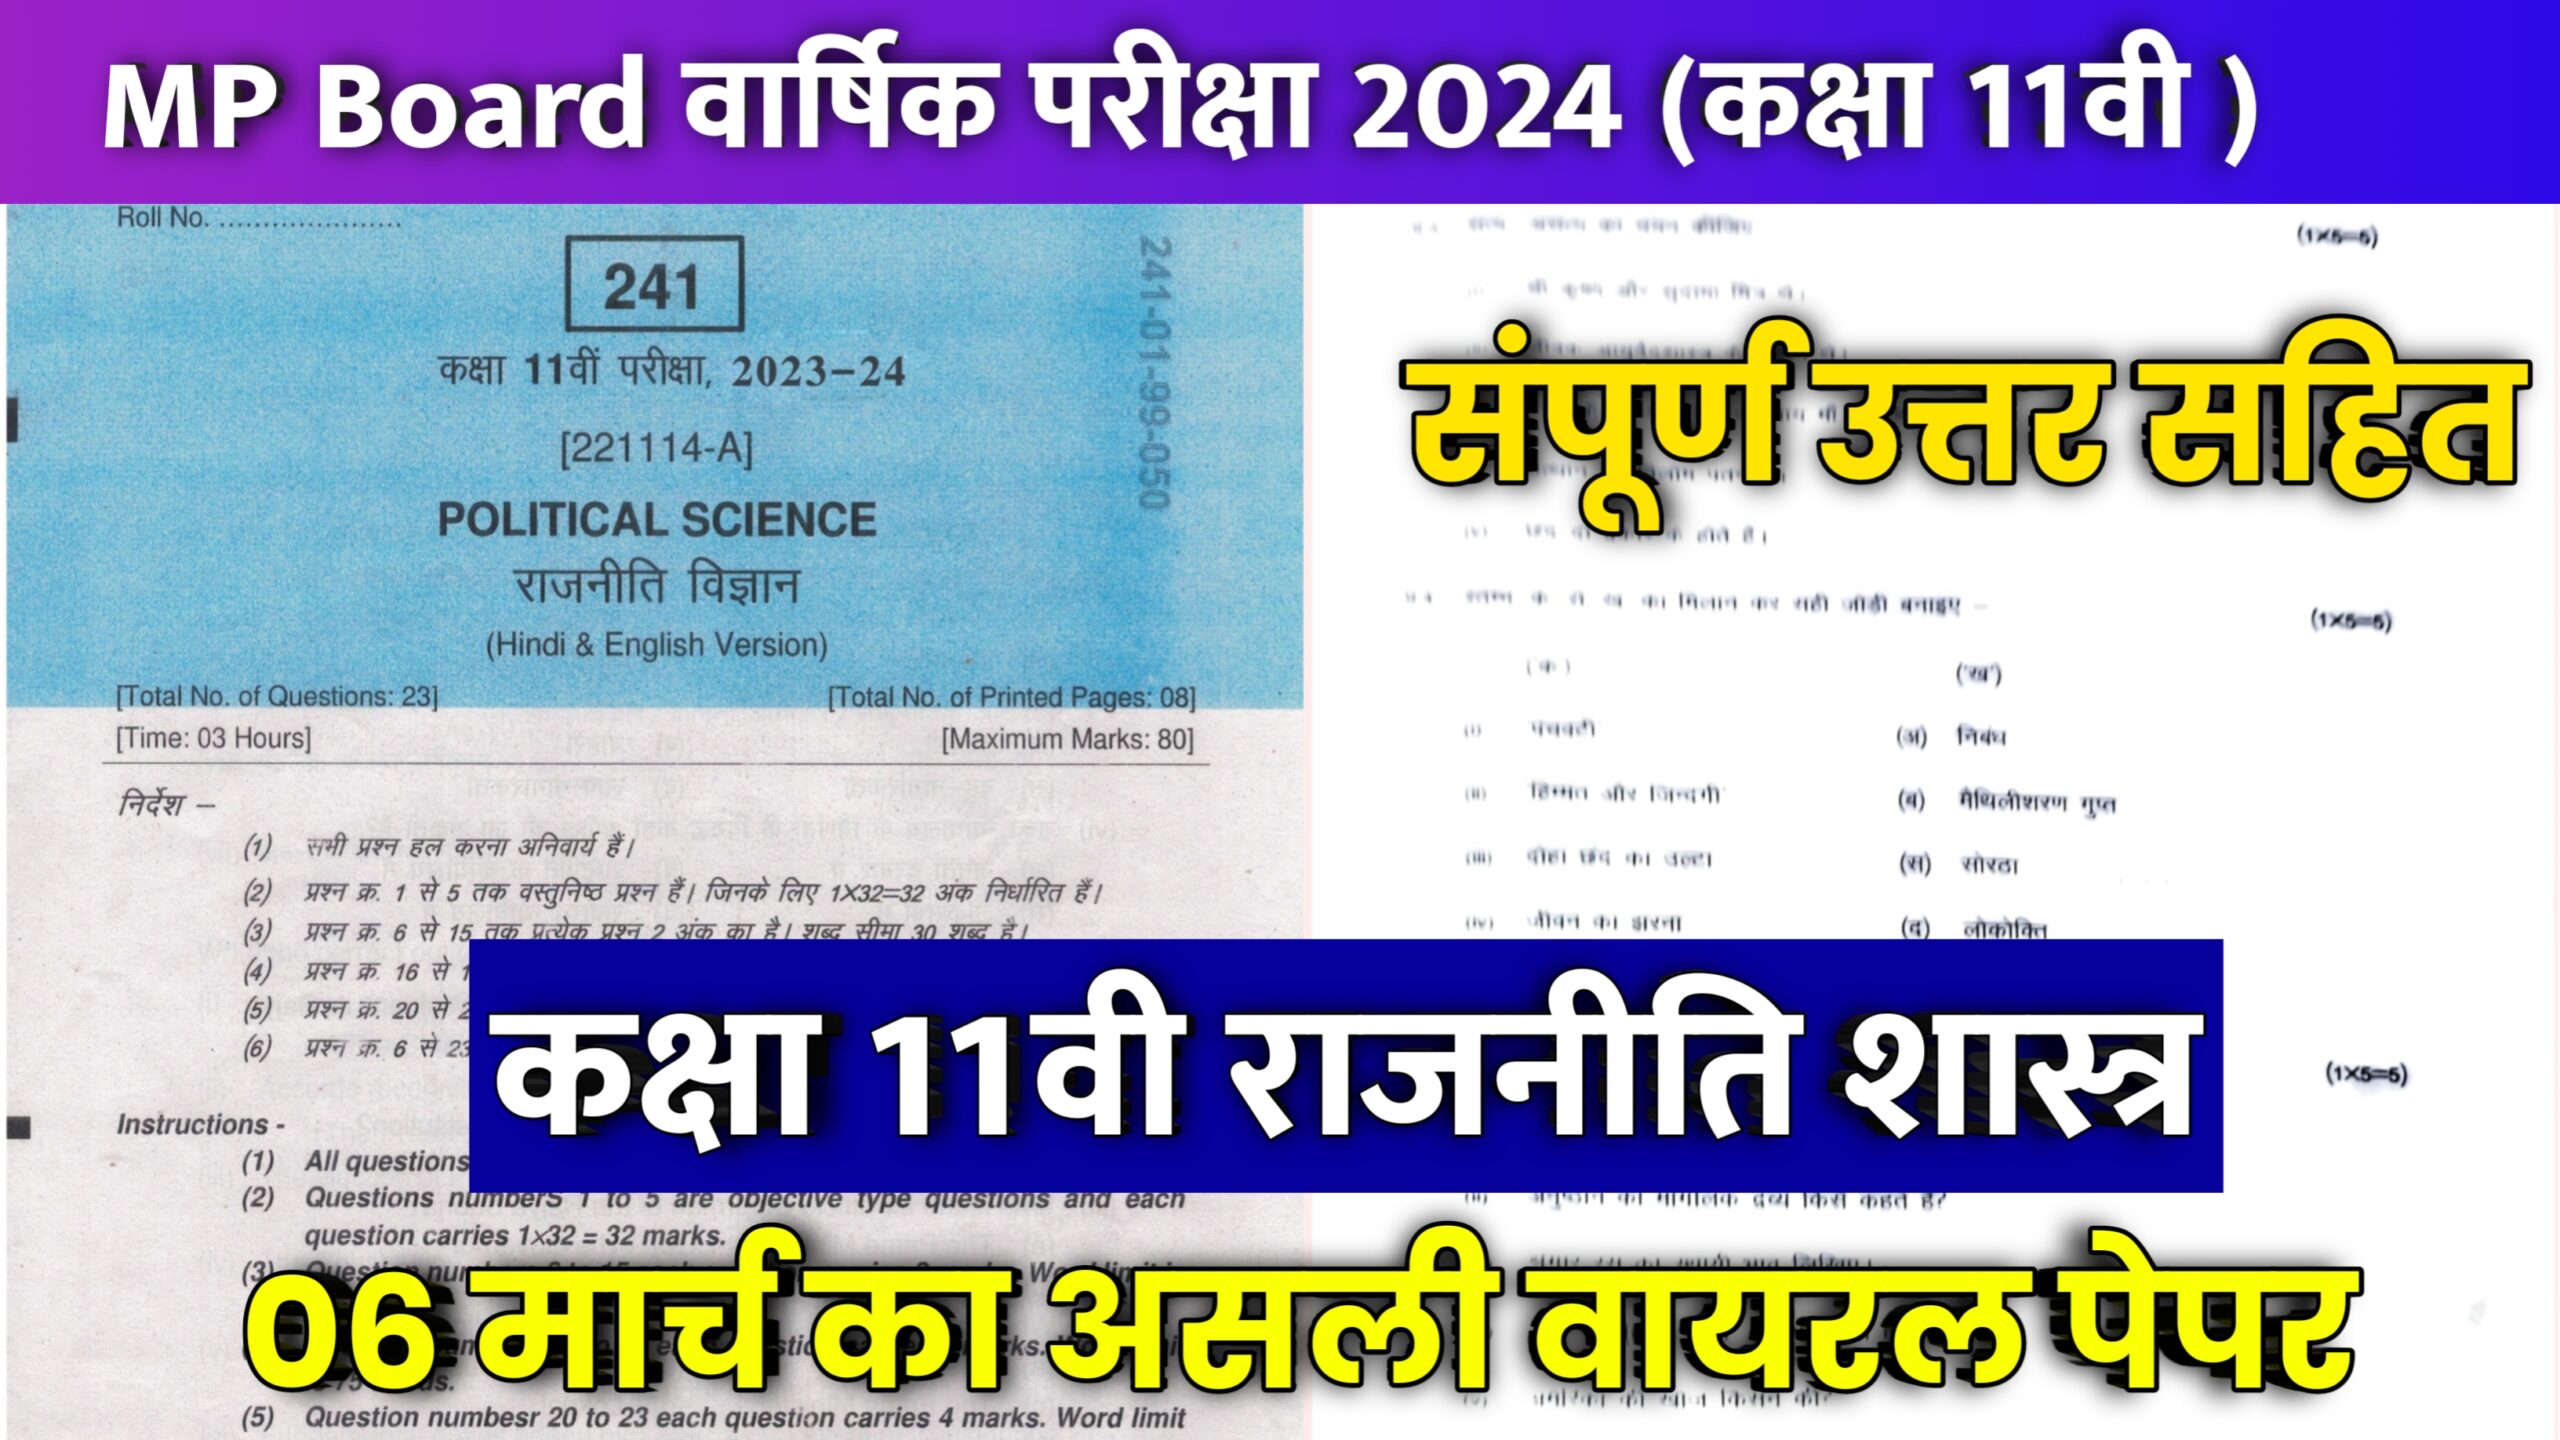 MP Board 11th Political Science Paper 2024, class 11th political science annual exam paper 2024,class 11th political science paper 2024 mp board,rajniti shastra paper 11th class 2024,rajniti vigyan varshik paper board exam 2024 class 11th,class 11th rajniti shastra varshik paper 2024,mp board varshik paper 2024,rajniti vigyan annual exam paper 2024 class 11th,political science class 12 model paper 2024,class 11th political science paper 2024 mp,class 11th political science mp board varshik pariksha real paper 2024